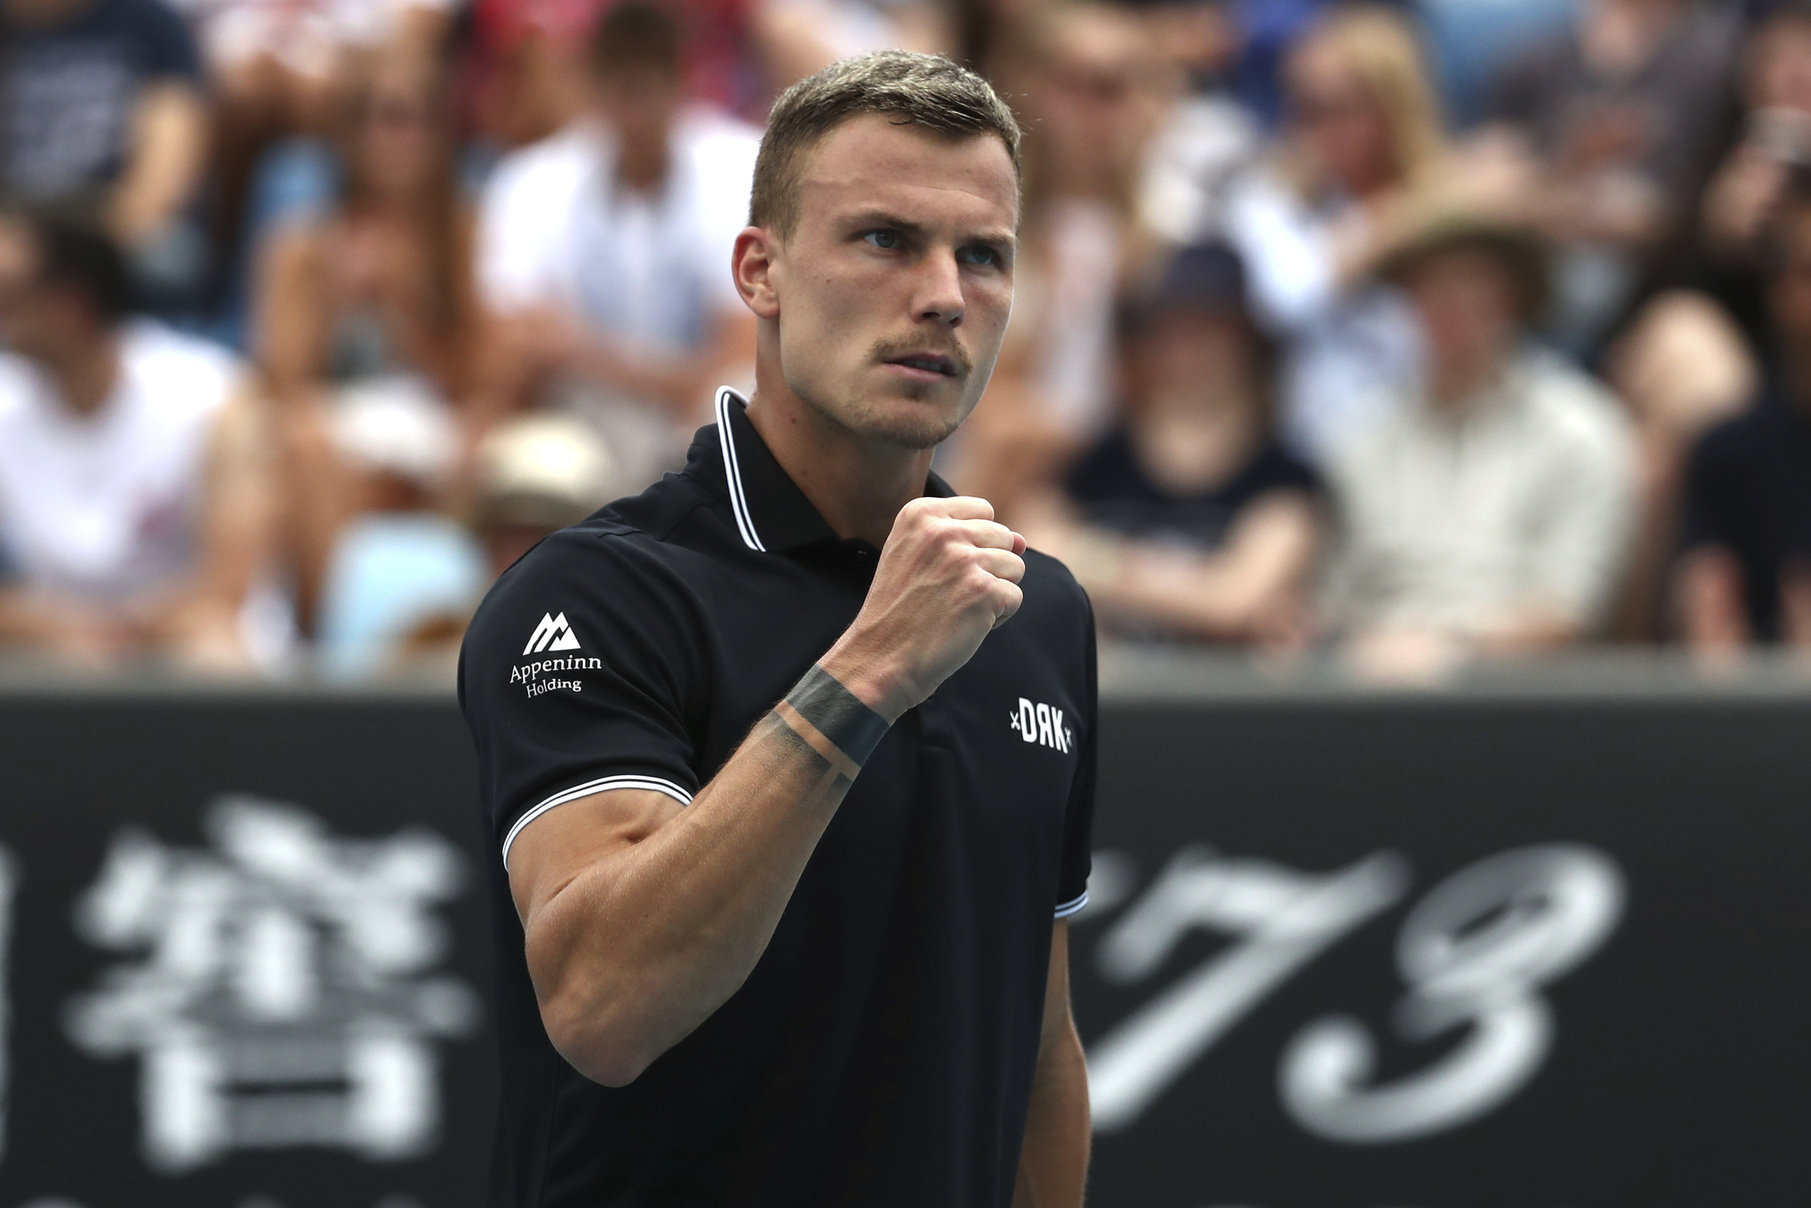 Hungarian Fucsovics marches on at the Australian Open Daily News Hungary